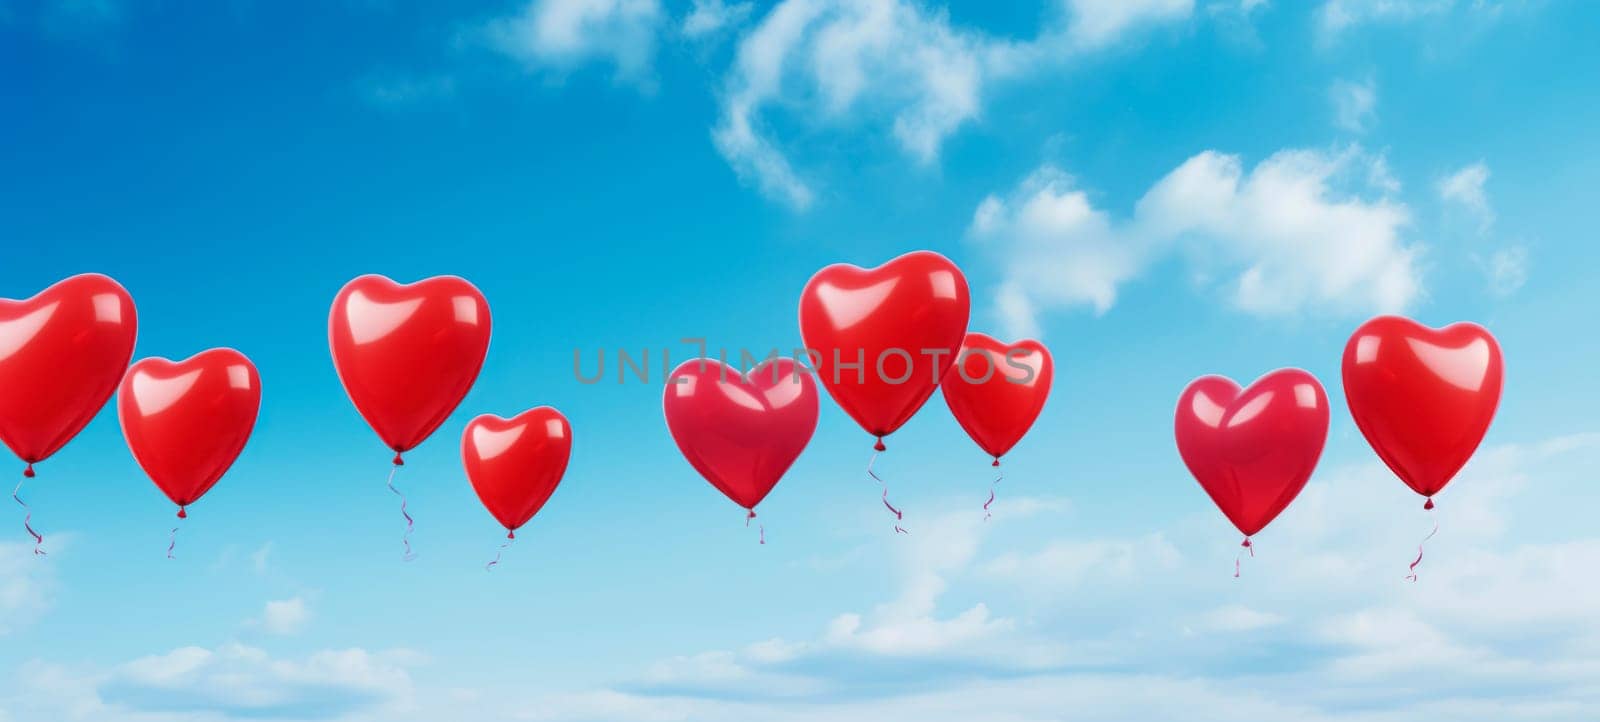 Love is in the Air: Red Heart Balloons Against Blue Sky by andreyz